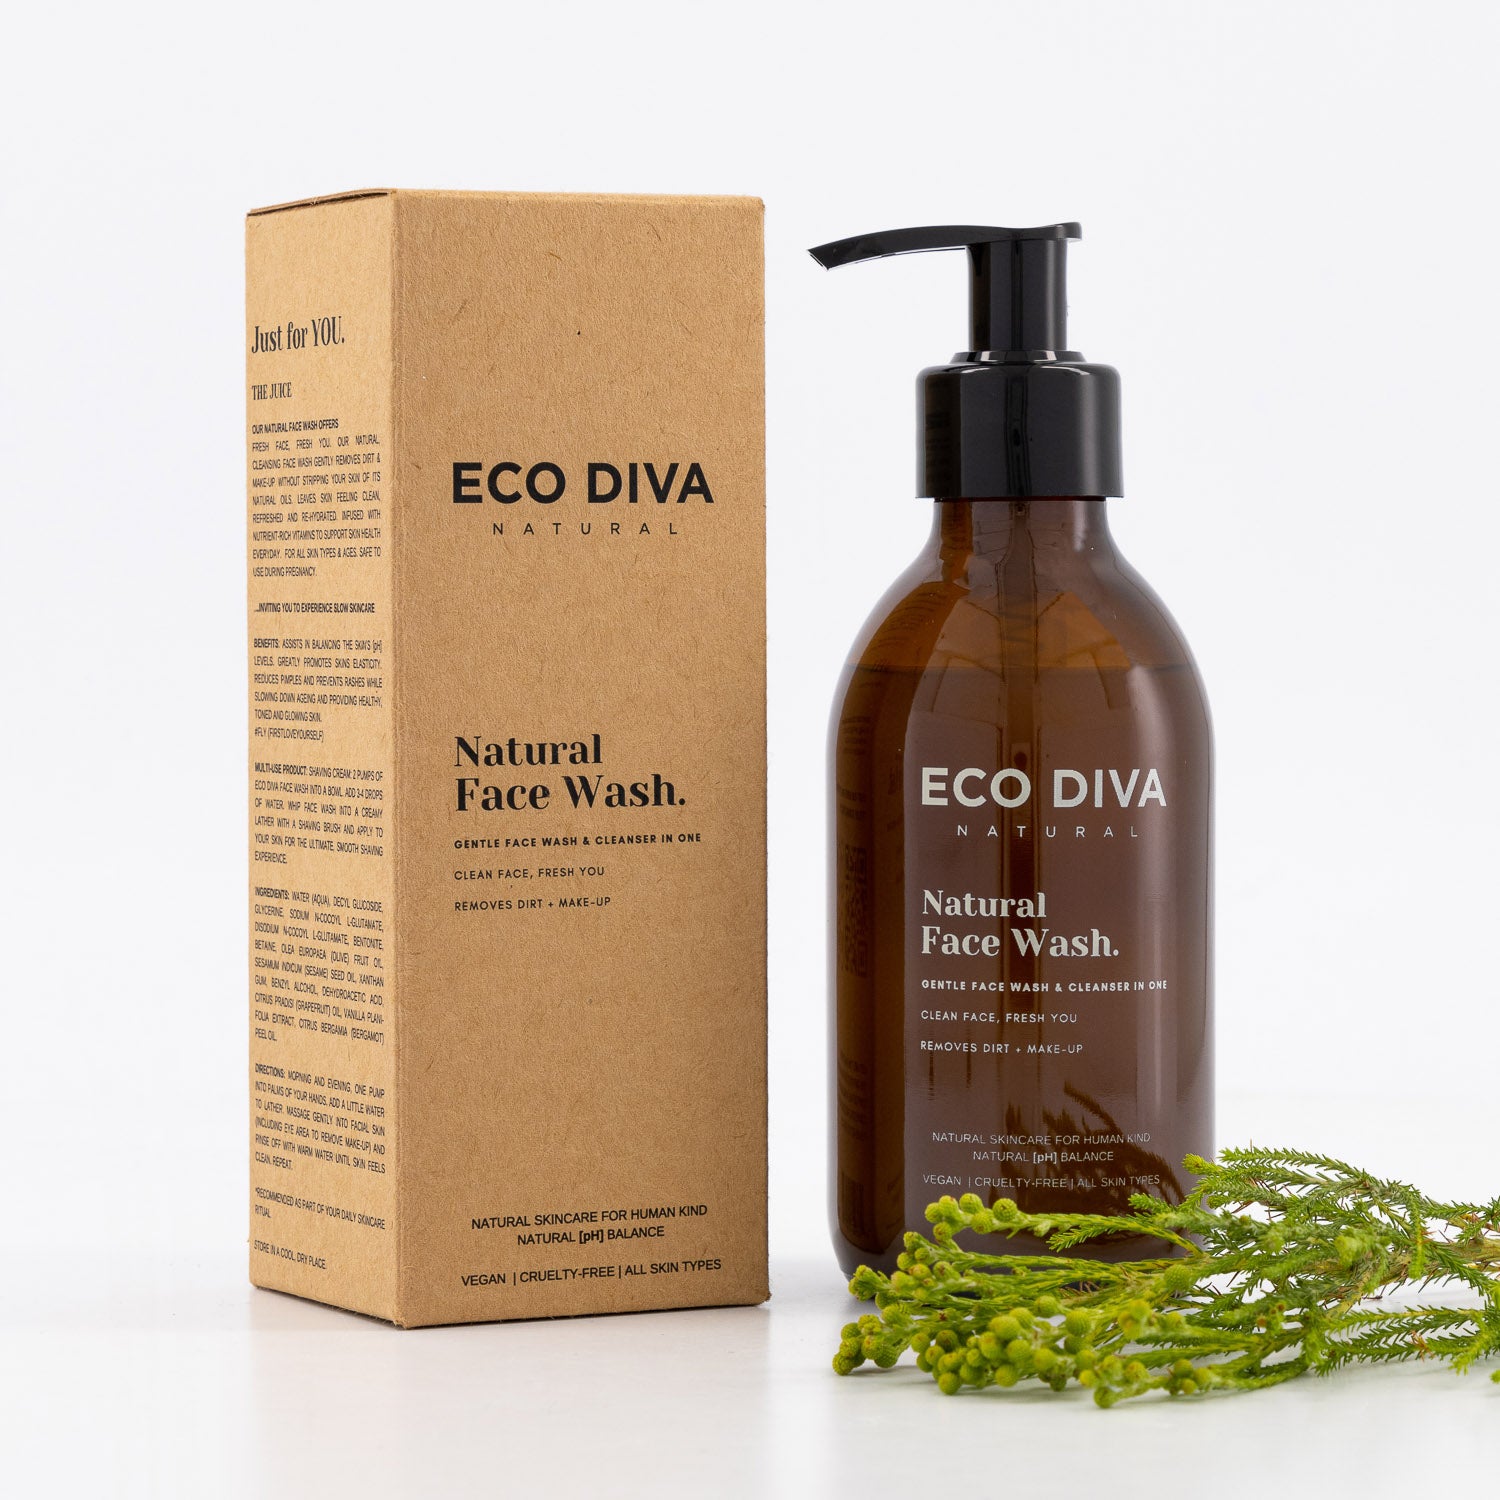 Eco Diva The Natural Face Wash